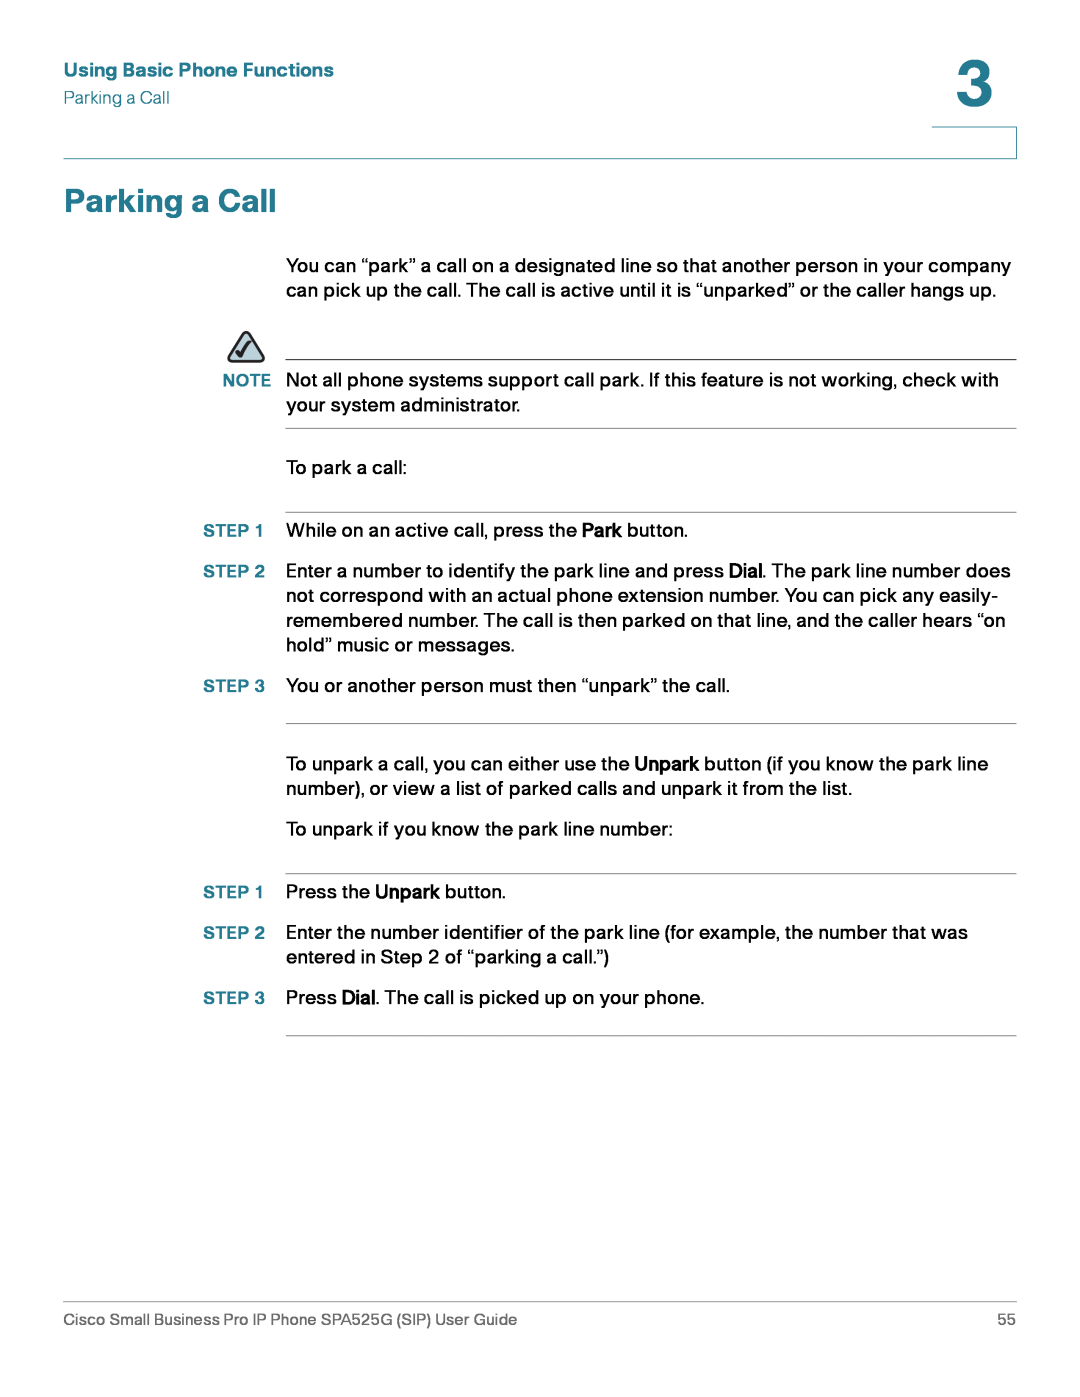 Cisco Systems SPA525G manual Parking a Call, Using Basic Phone Functions 